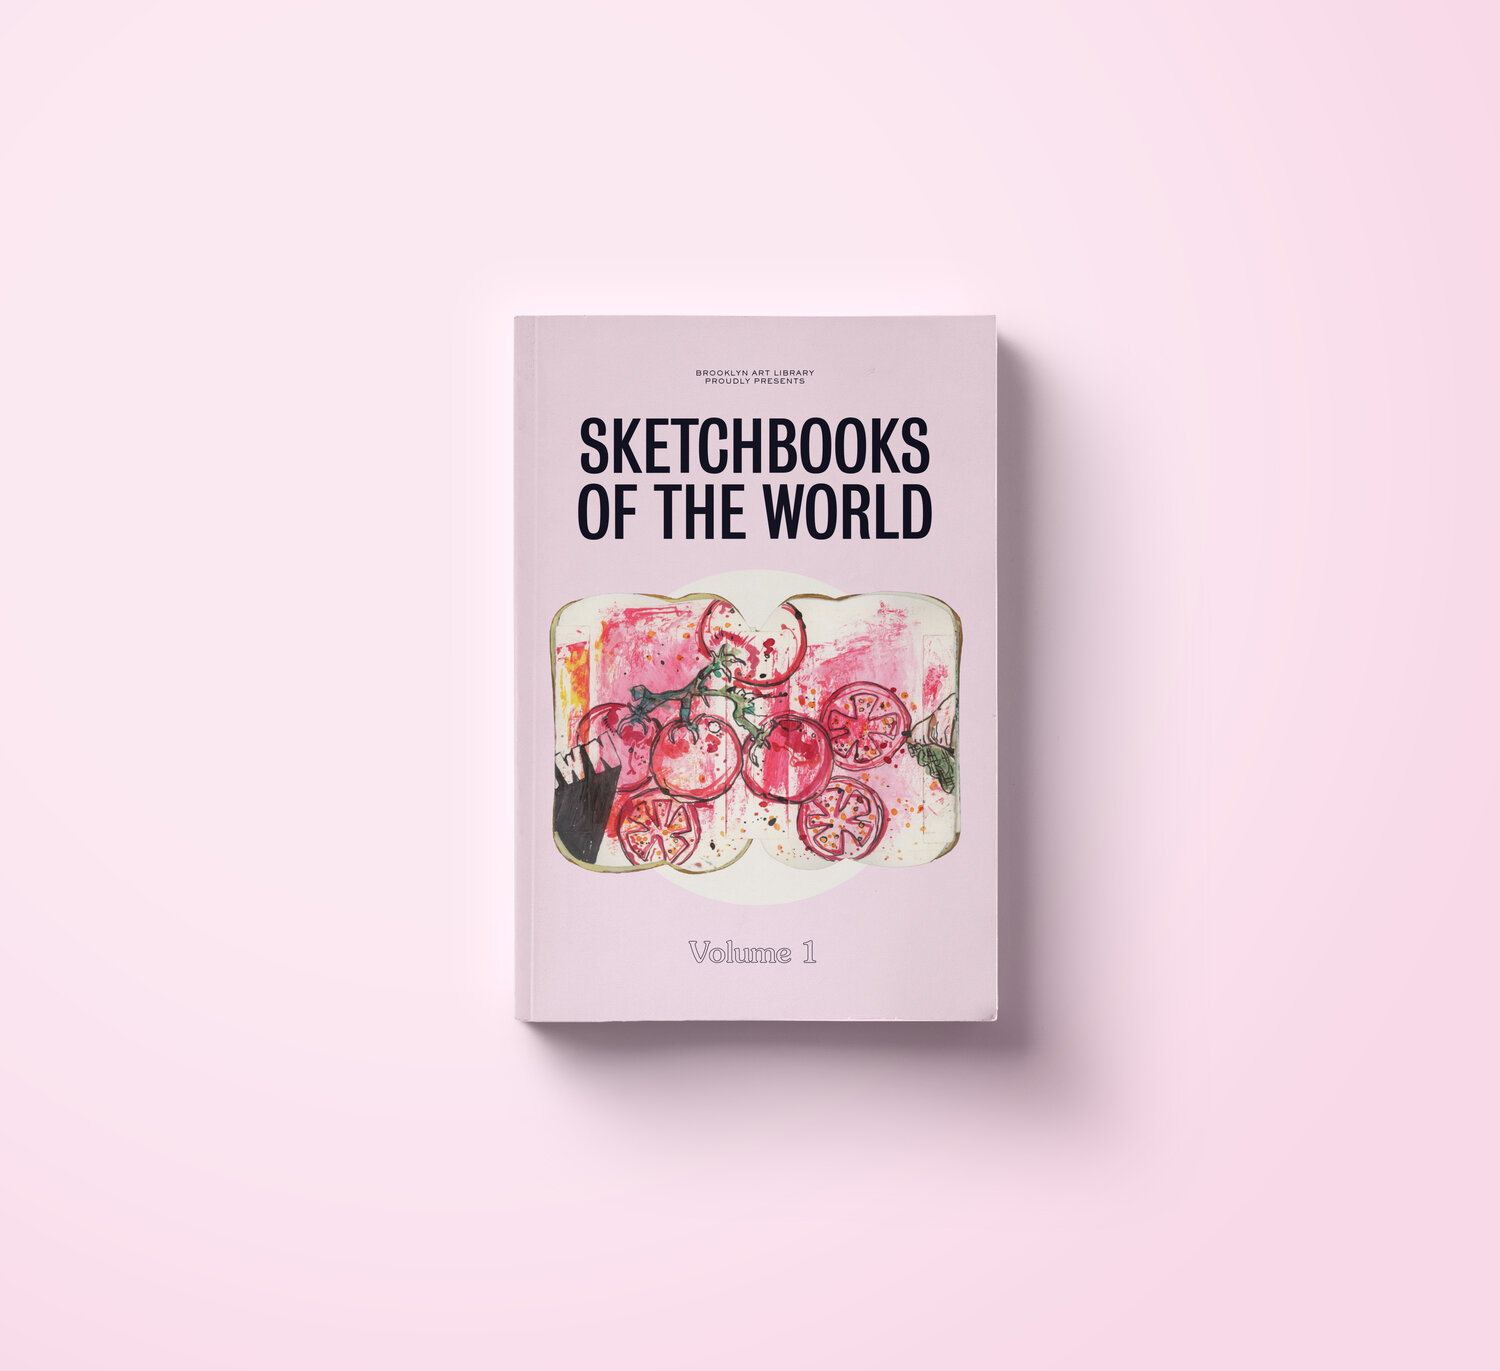 Brooklyn Art Library / The Sketchbook Project